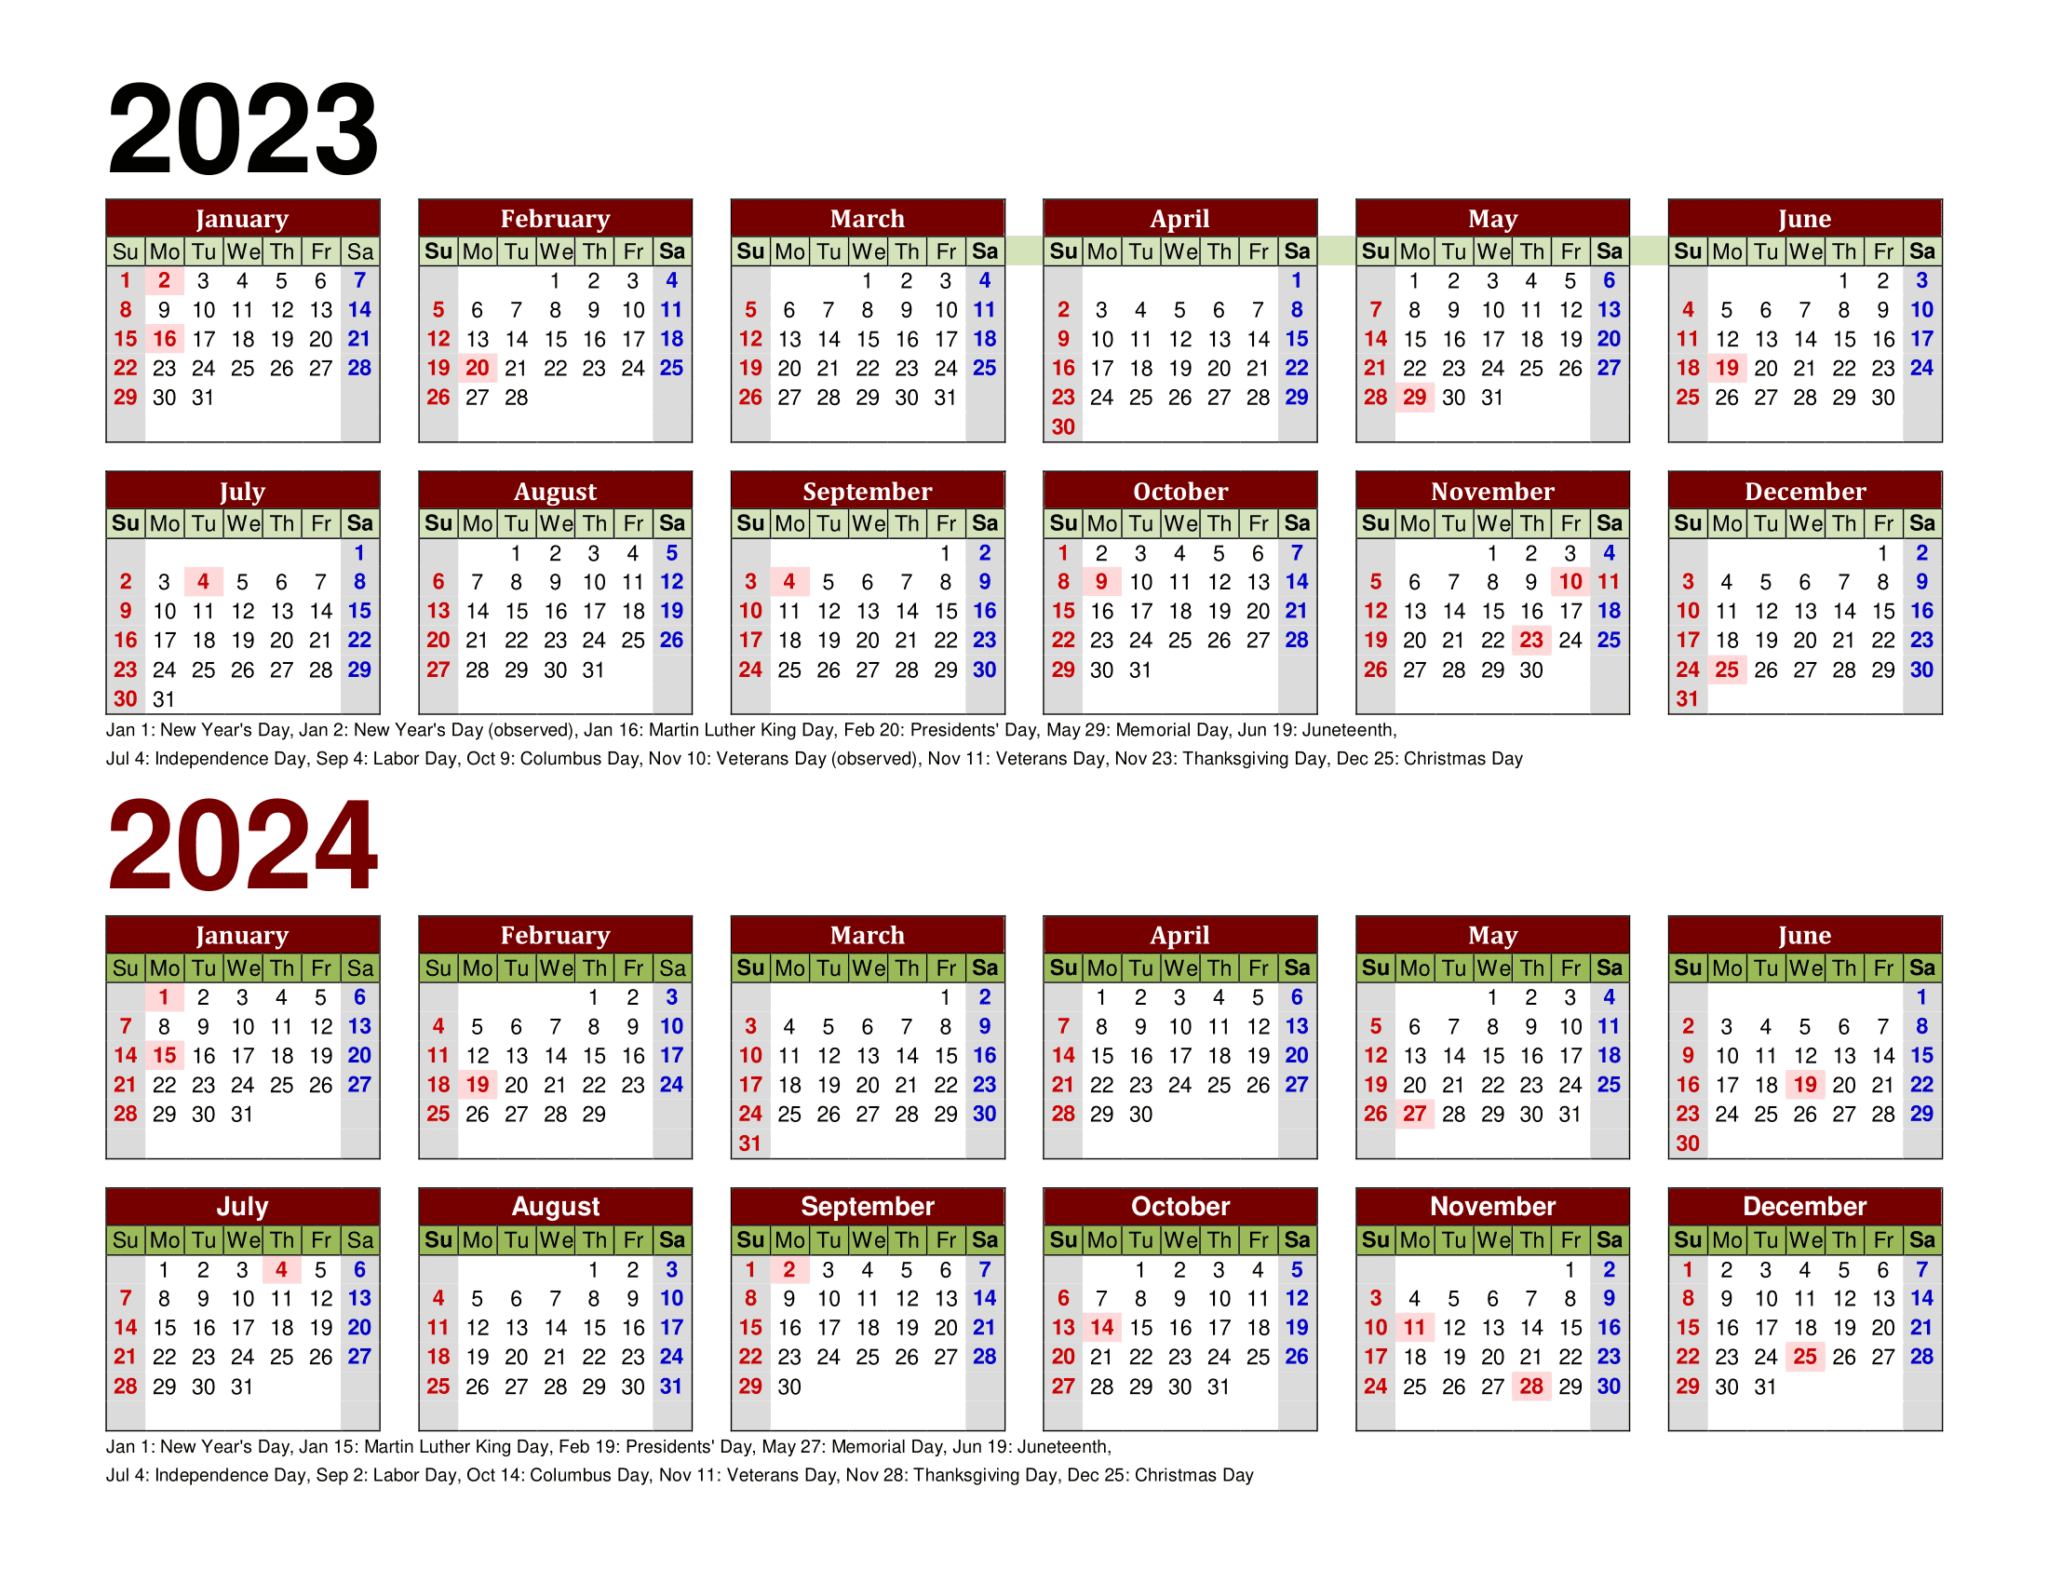 Free Printable Two Year Calendar Templates for 2023 and 2024 in PDF